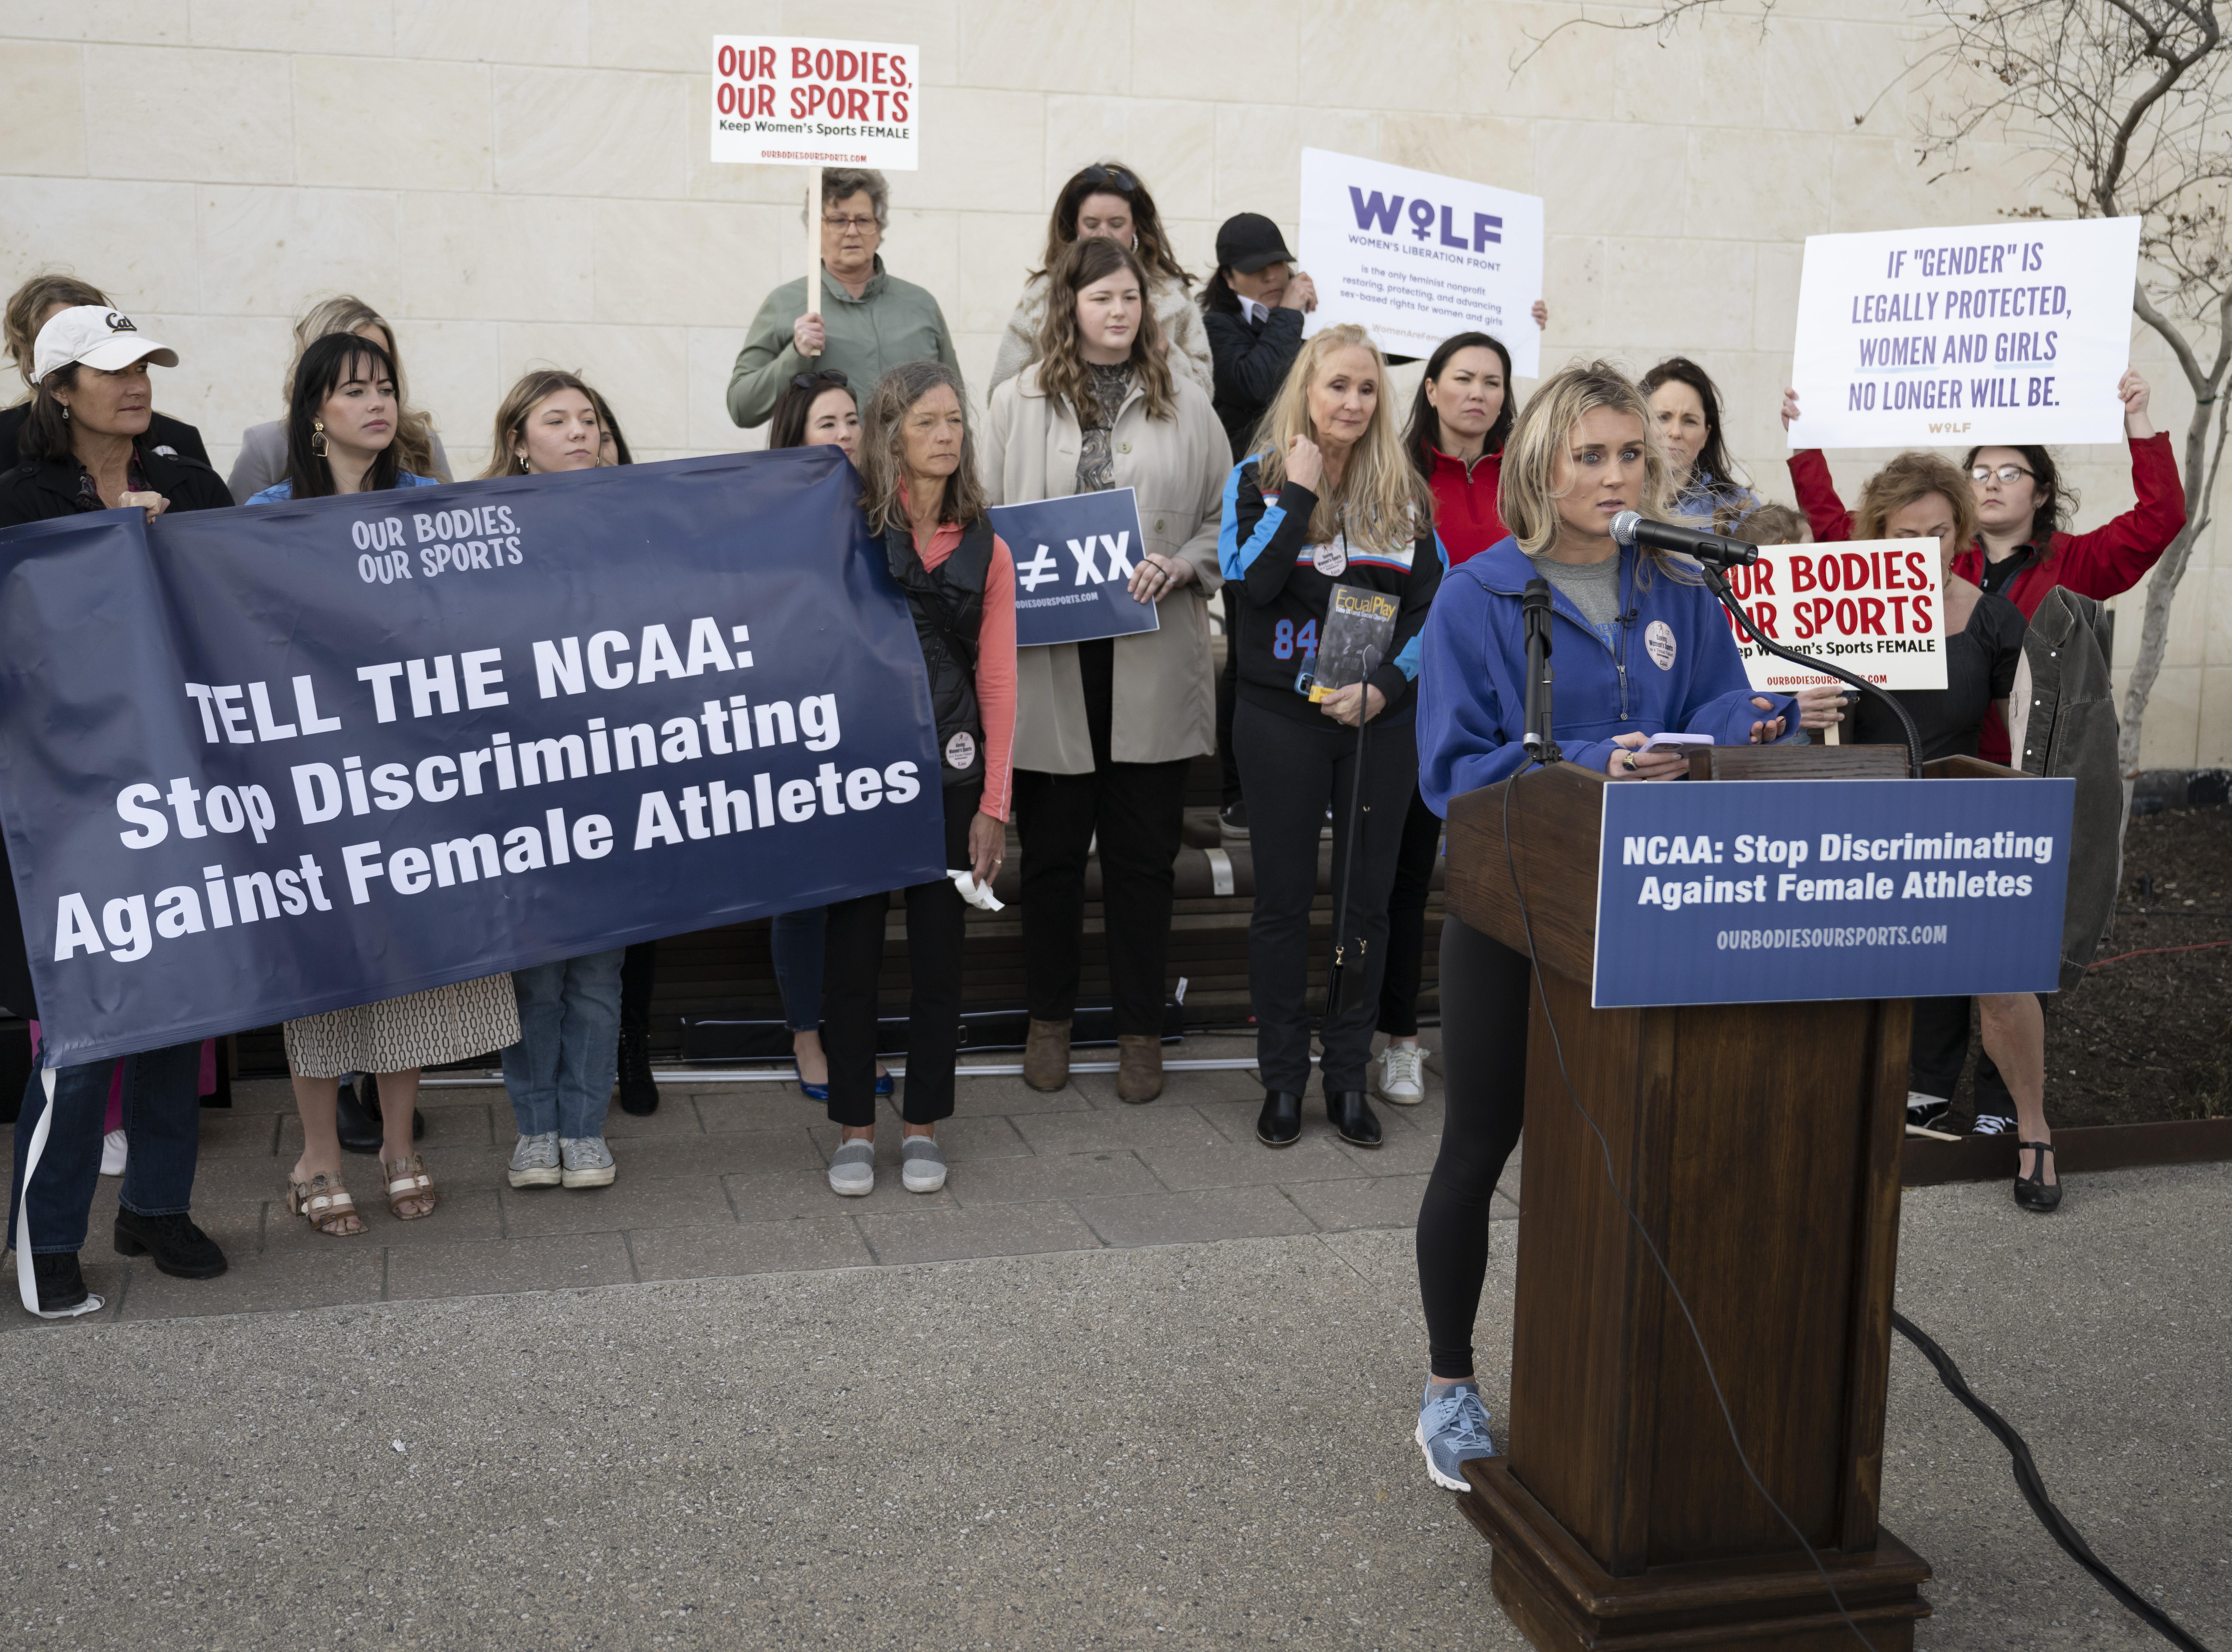 Riley Gaines: Amending Title IX is bad for women's sports